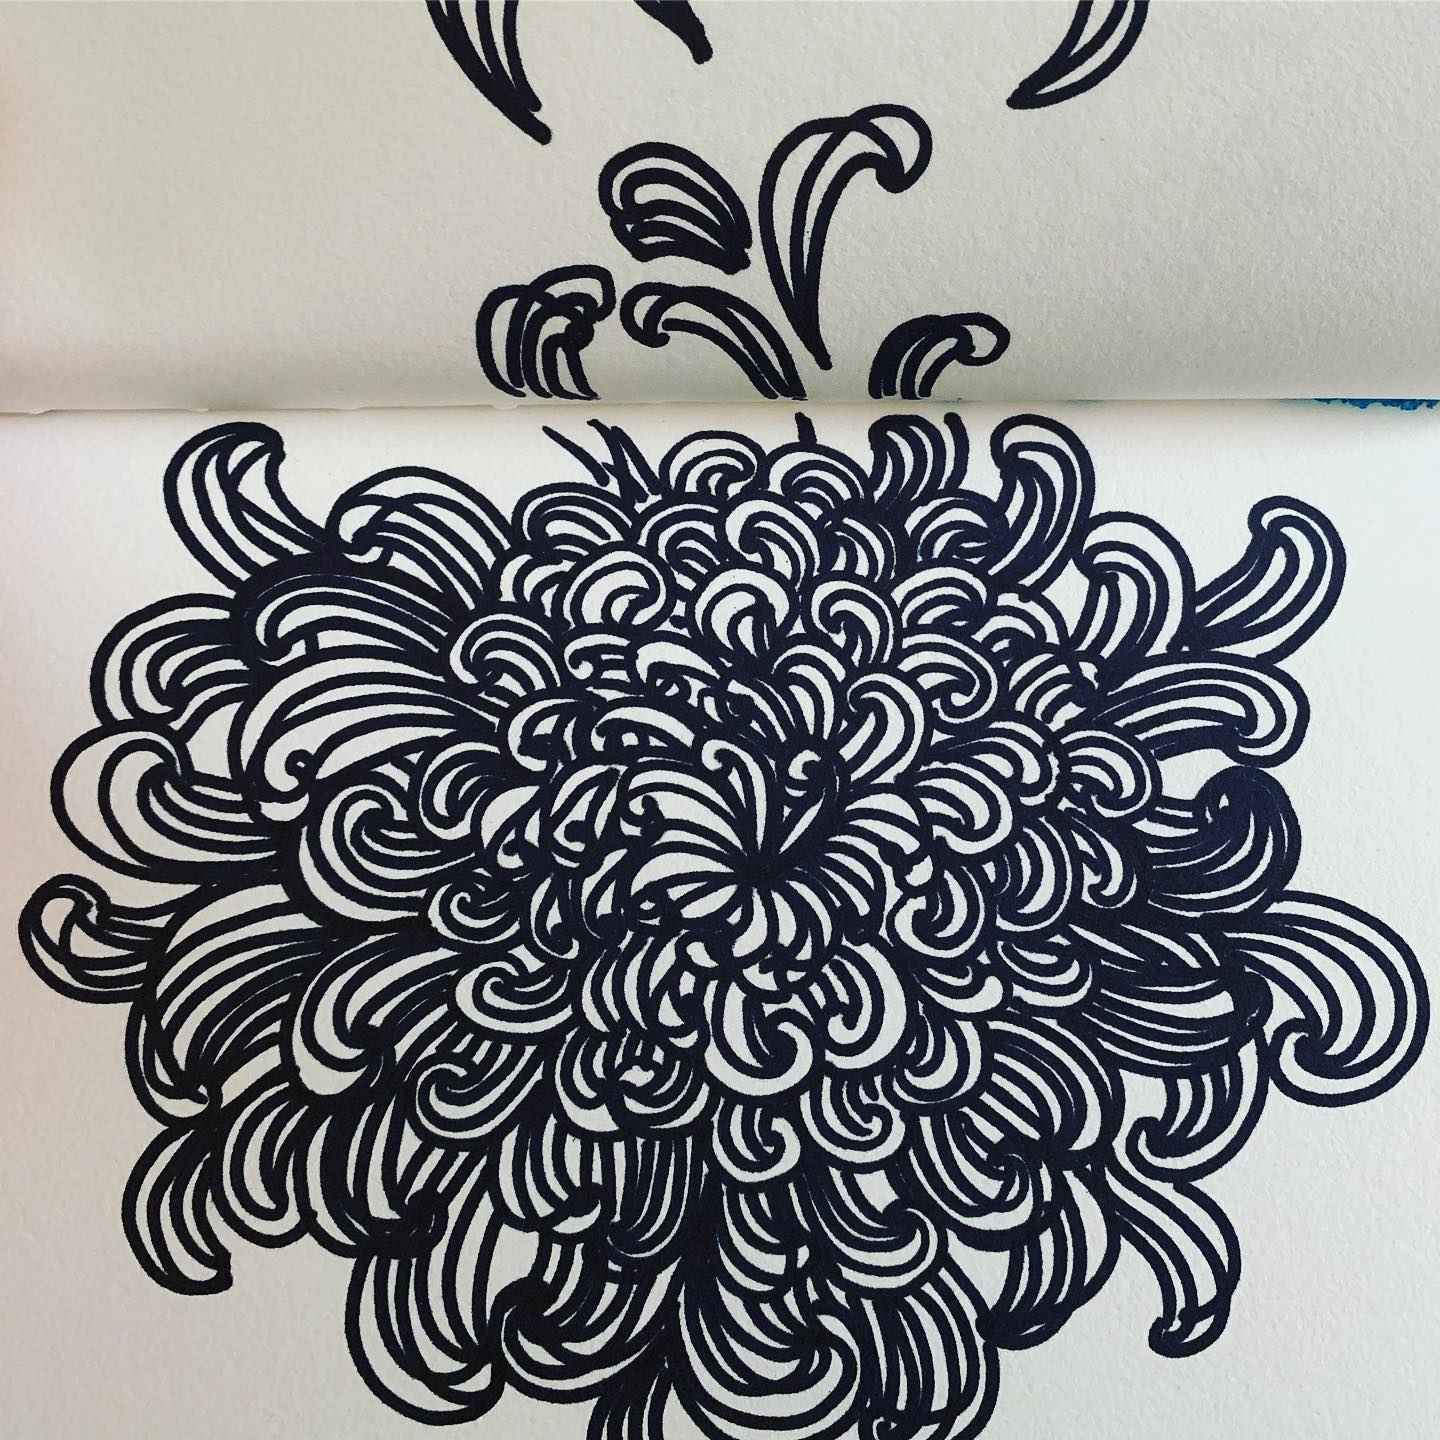 Good old sharpie! Can’t seem to stop doodling!